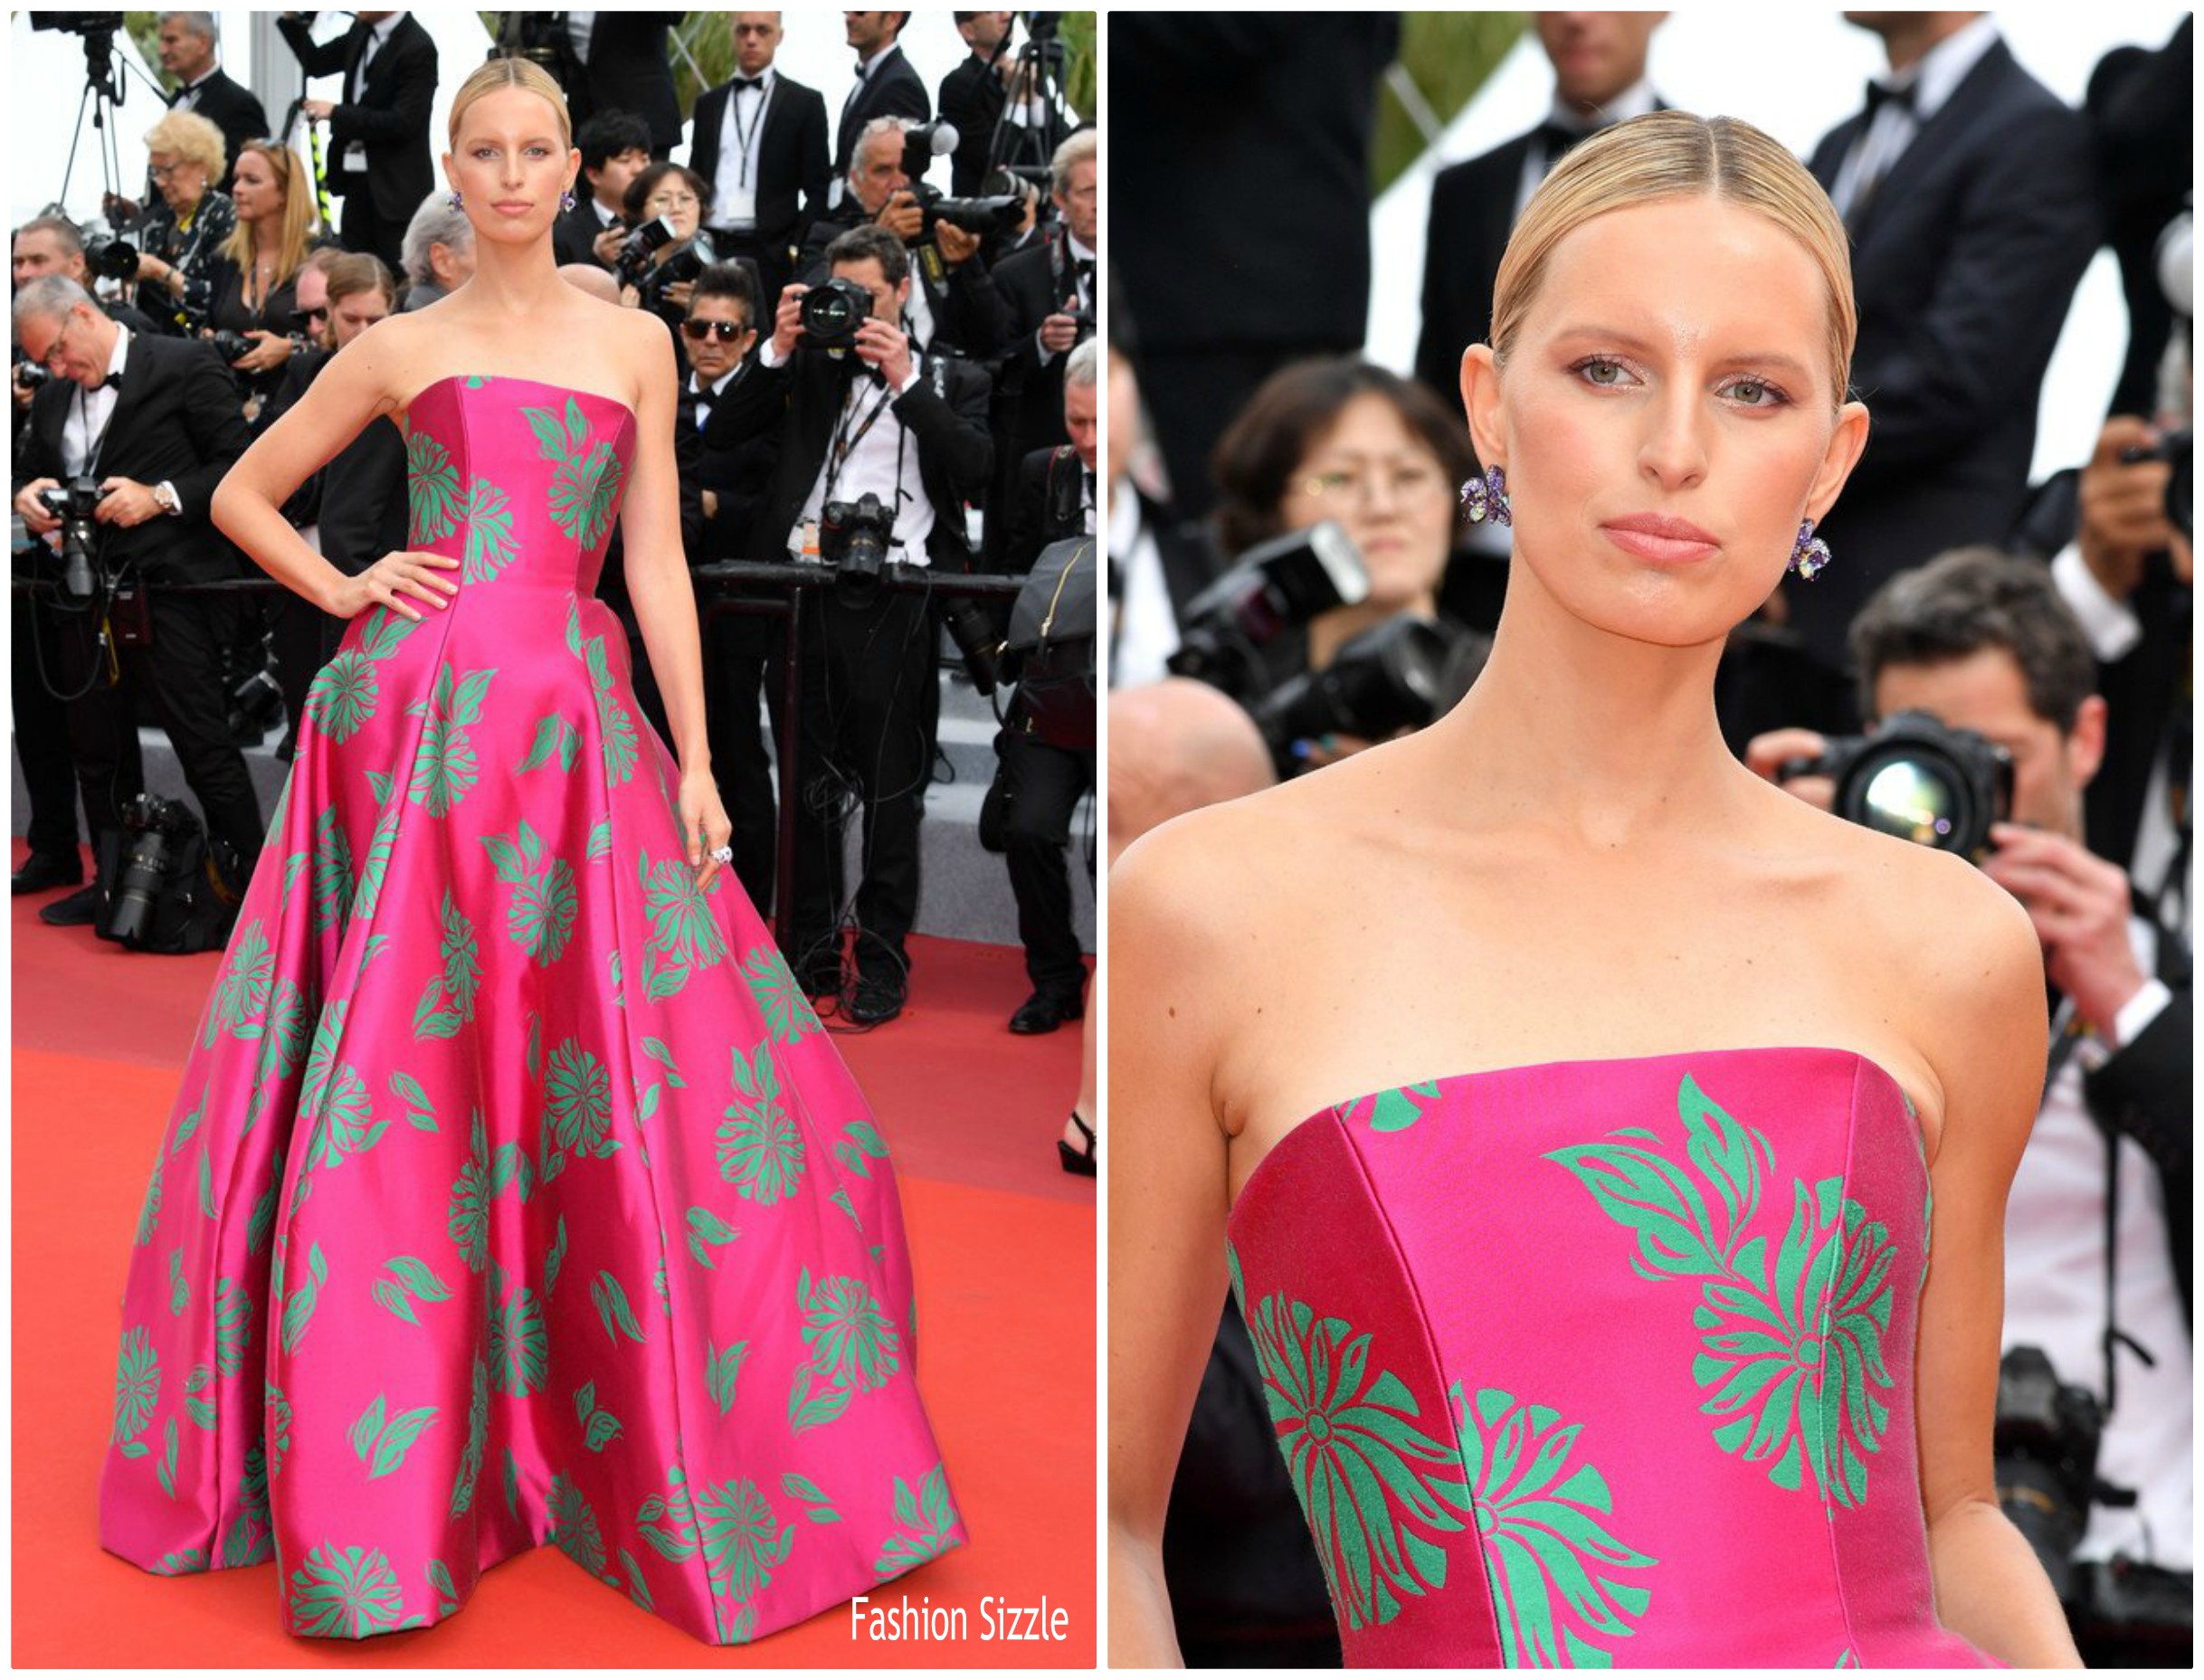 karolina-kurkova-in-etro-once-upon-a-time-in-hollywood-cannes-film-festival-premiere